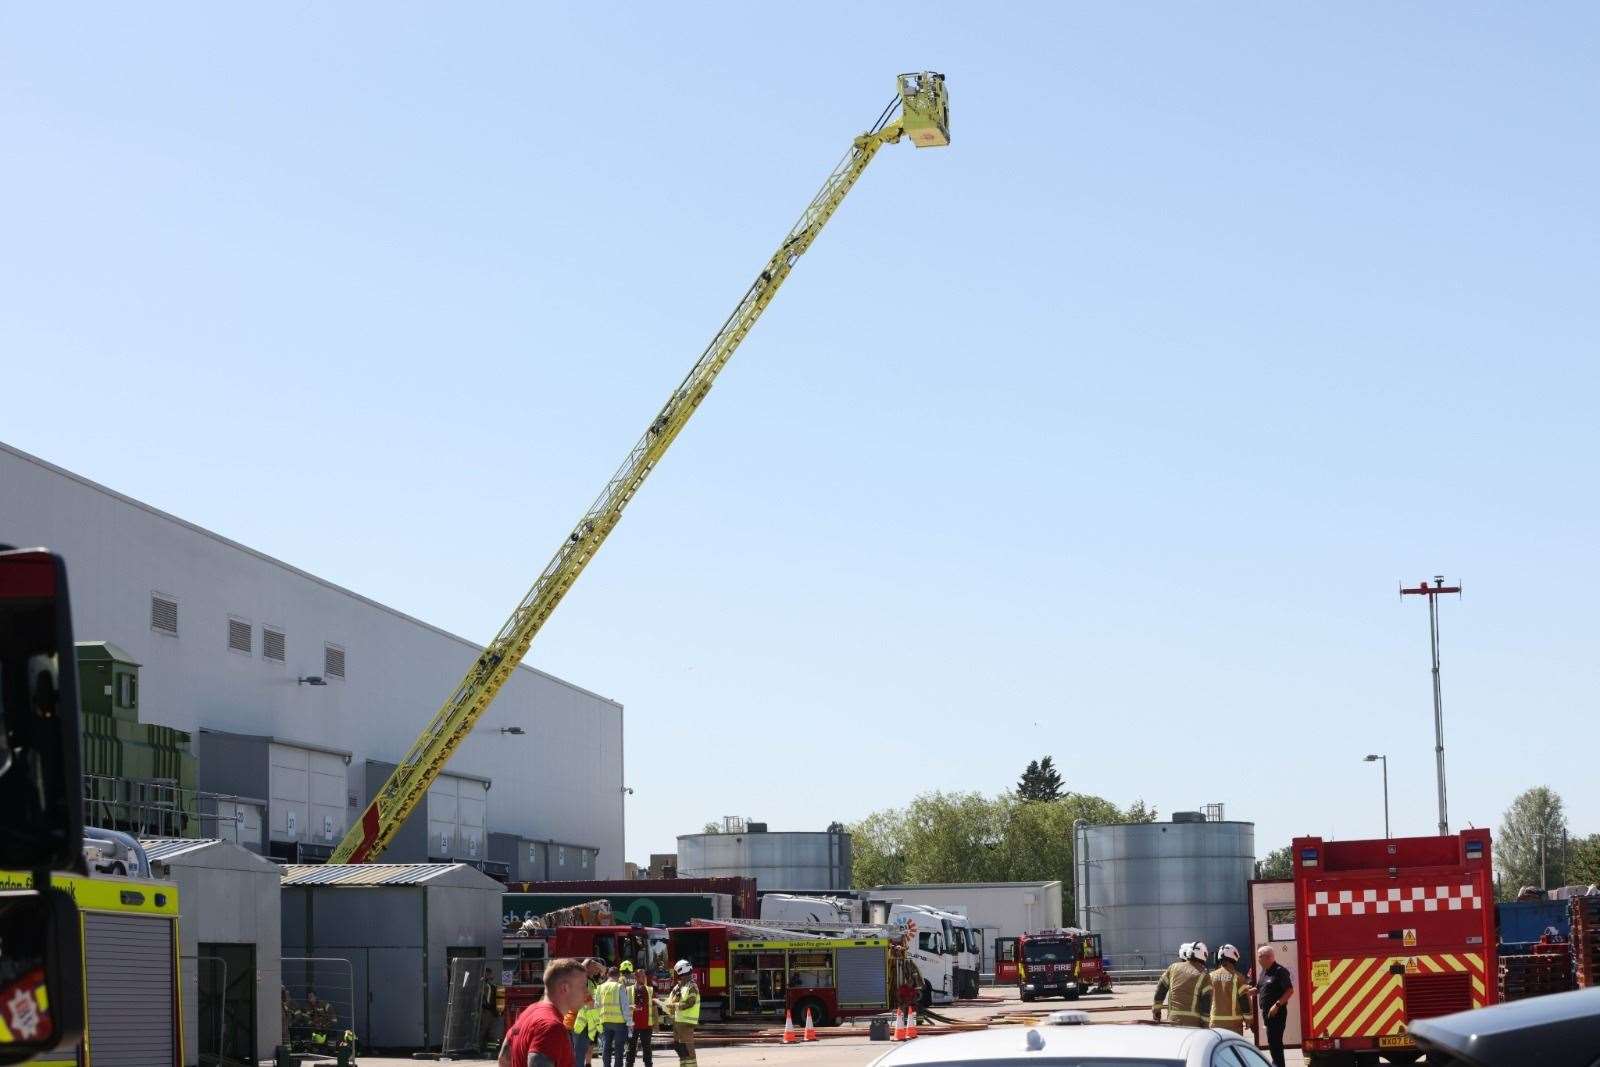 A crane was used by firefighters at the scene. Photo: UKNIP